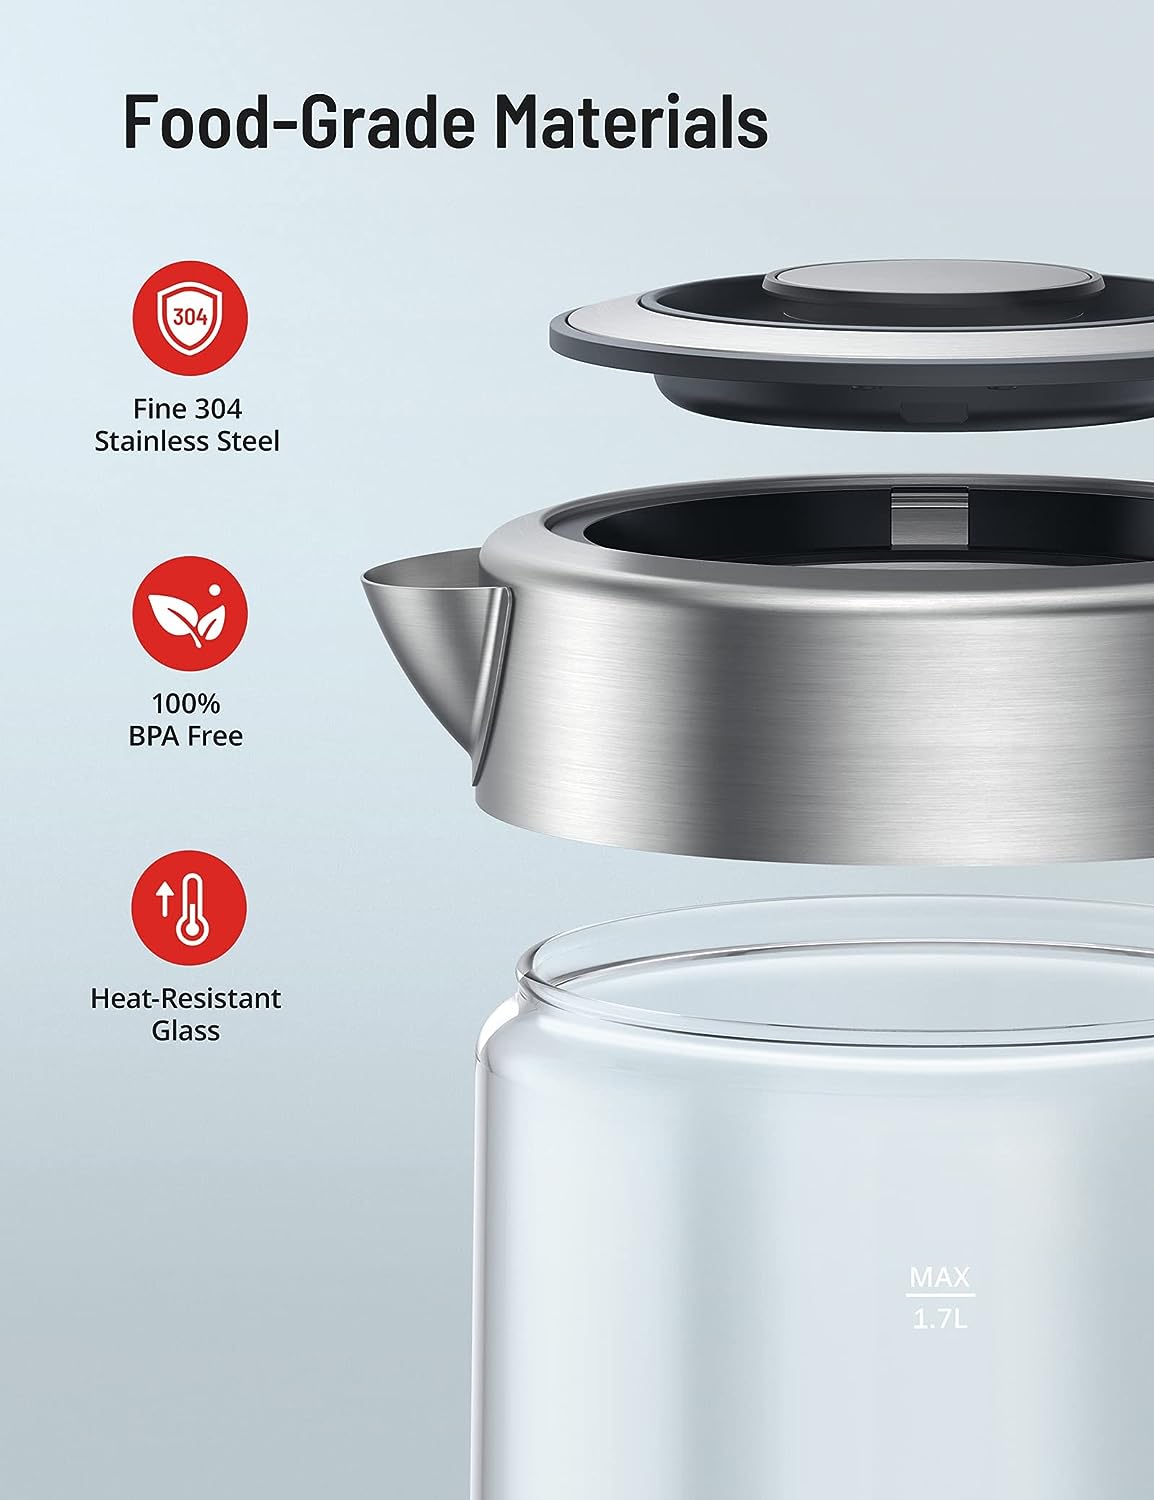 Electric Kettle Review